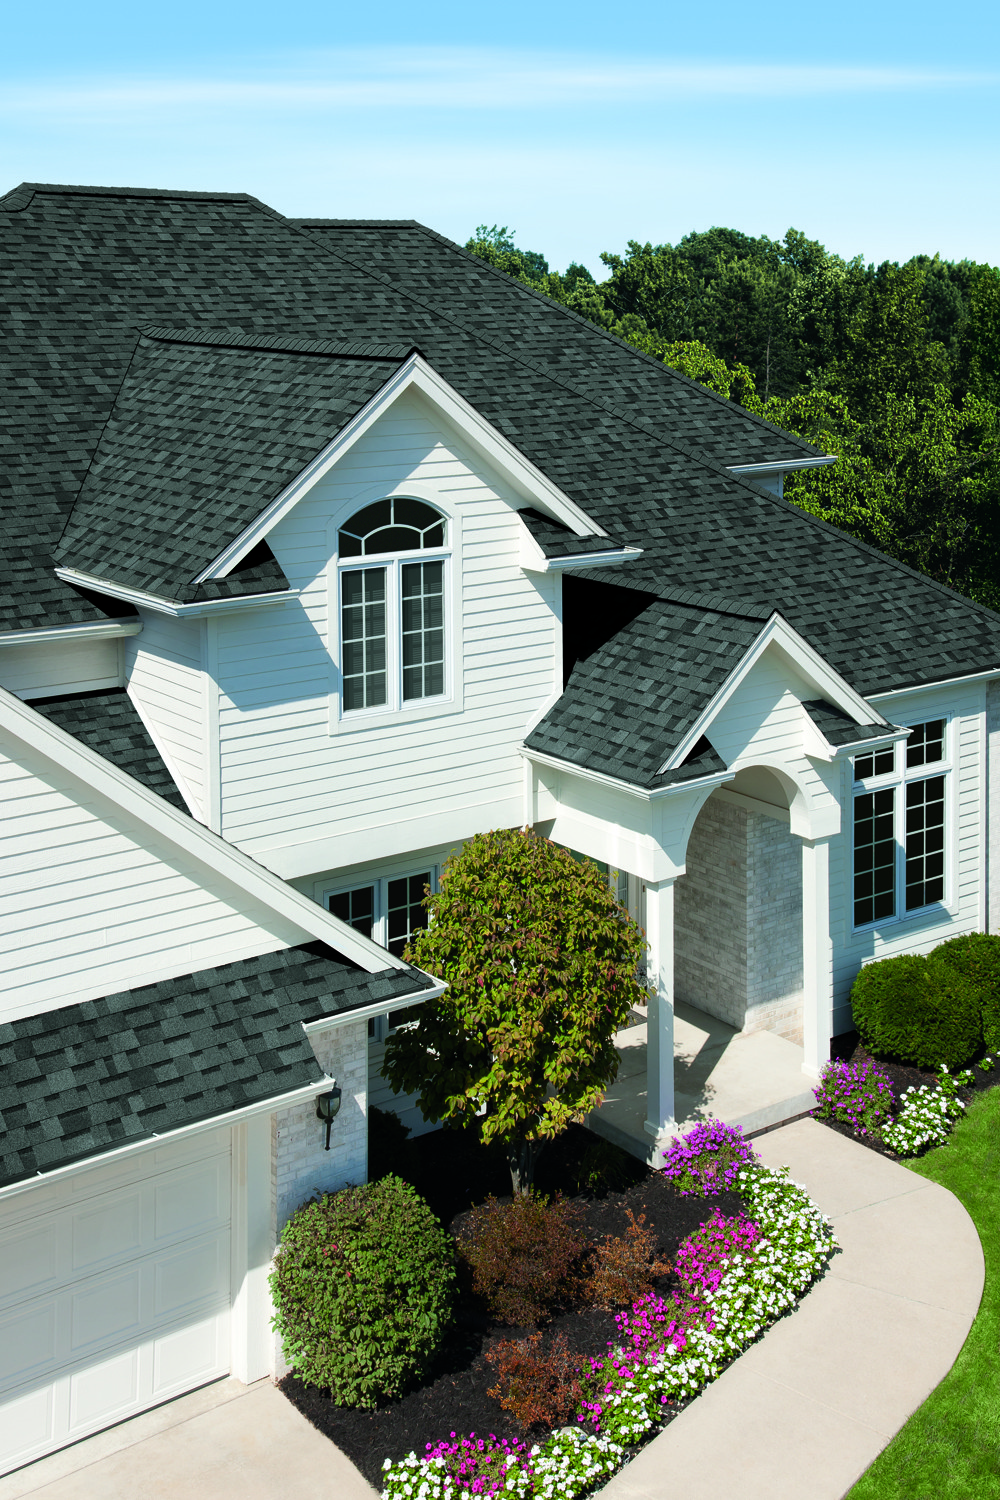 Owens Corning TruDefinition Duration in Estate Gray